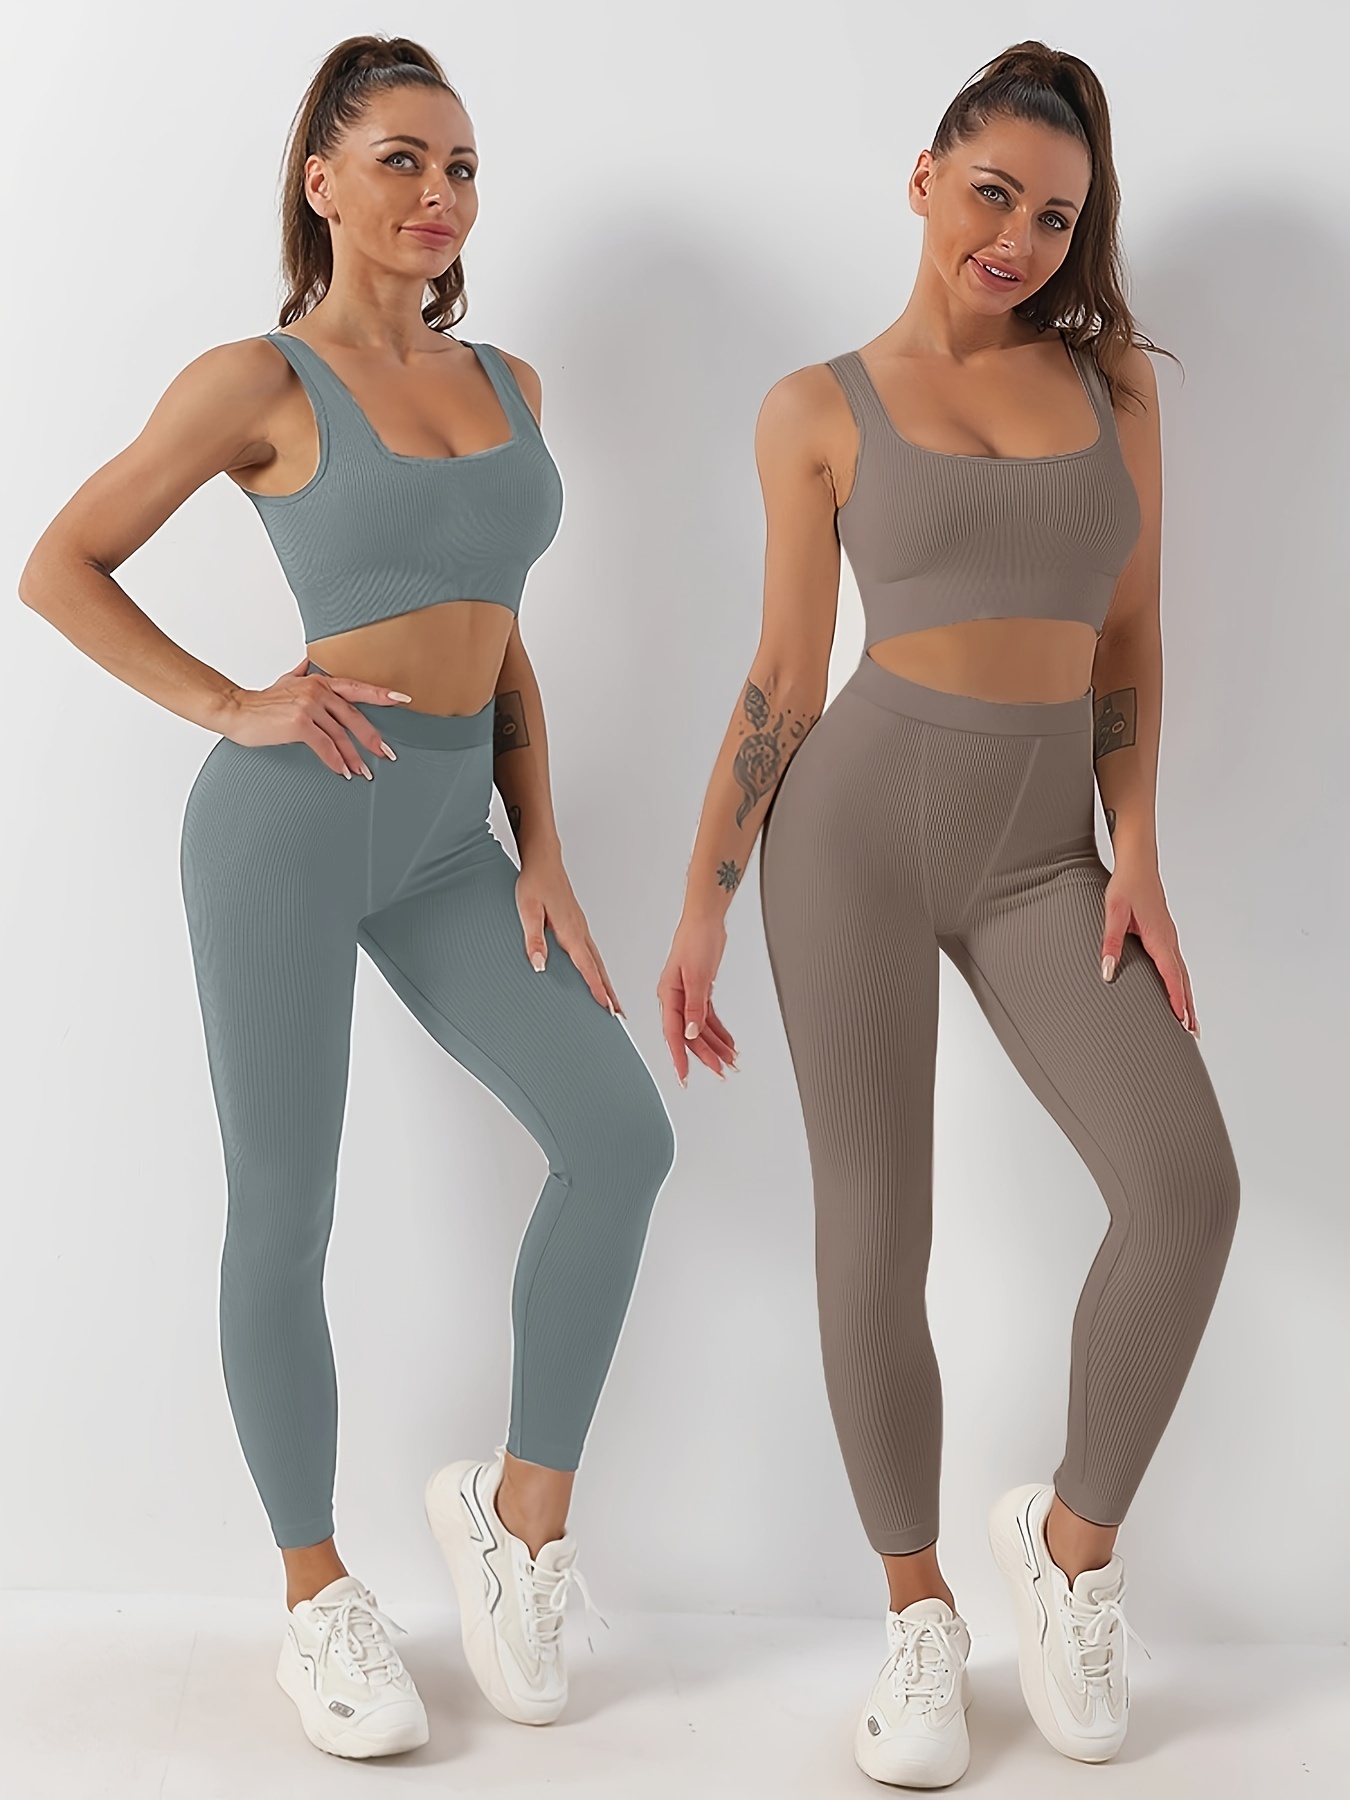 Yoga Basic 2pcs High Stretch Striped Fitness Yoga Suit Gym Outfits Set  Racer Back Top Wideband Waist Leggings